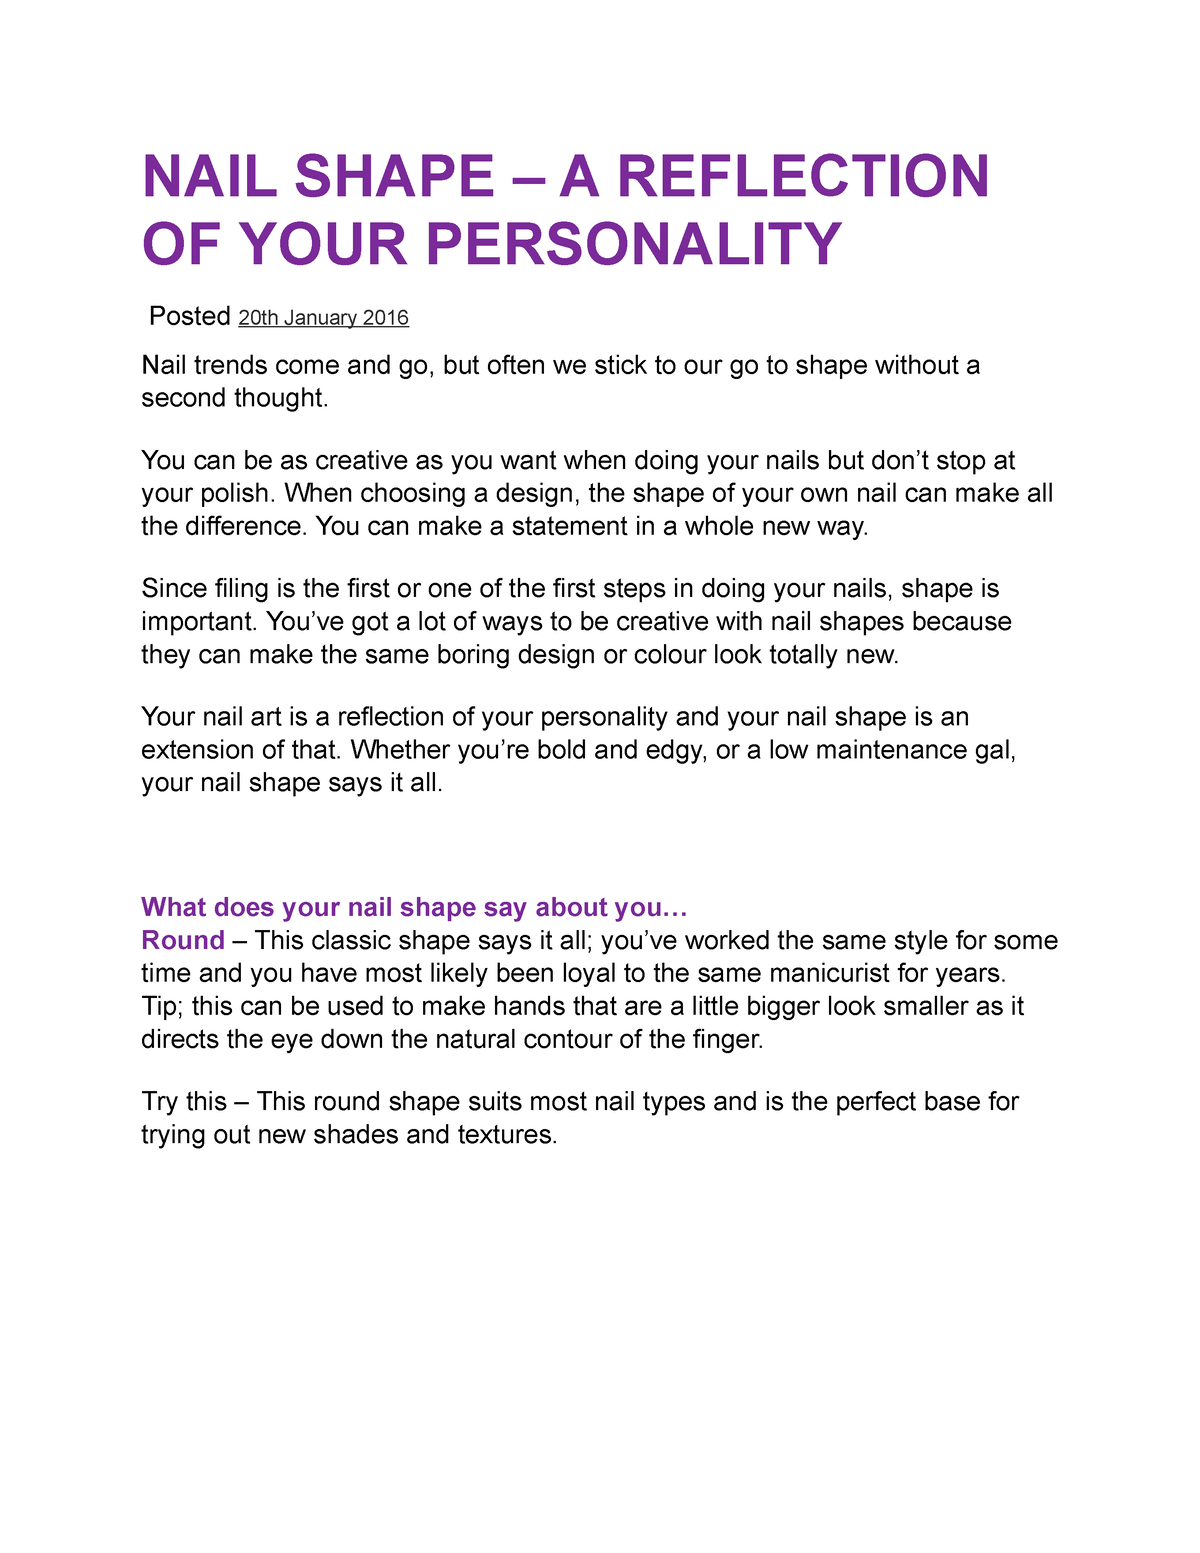 Shape to you personality - NAIL SHAPE – A REFLECTION OF YOUR PERSONALITY  Posted 20th January 2016 - Studocu